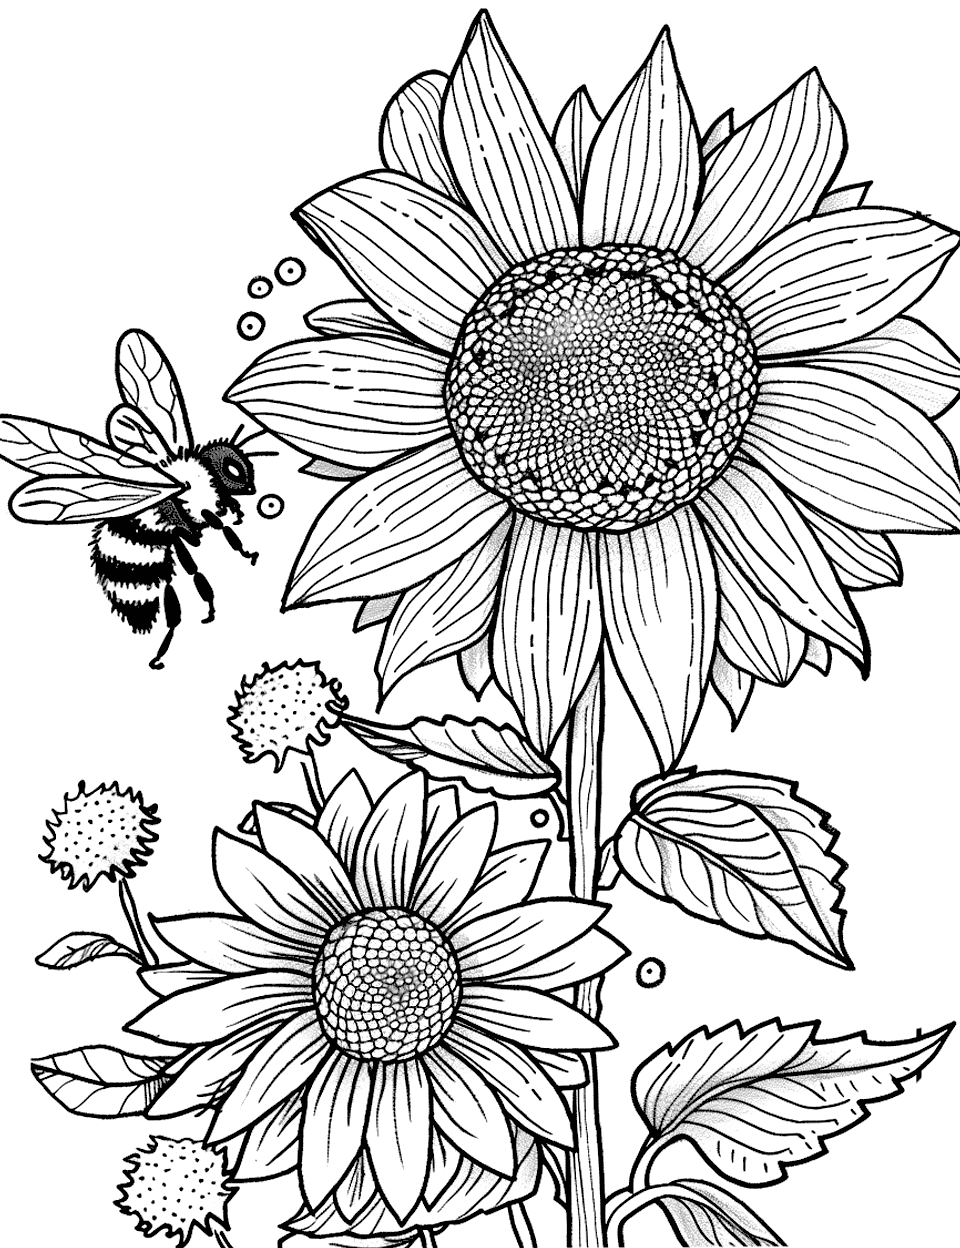 Busy Bee on a Sunflower Garden Coloring Page - A bee collecting pollen from a vibrant sunflower in full bloom.